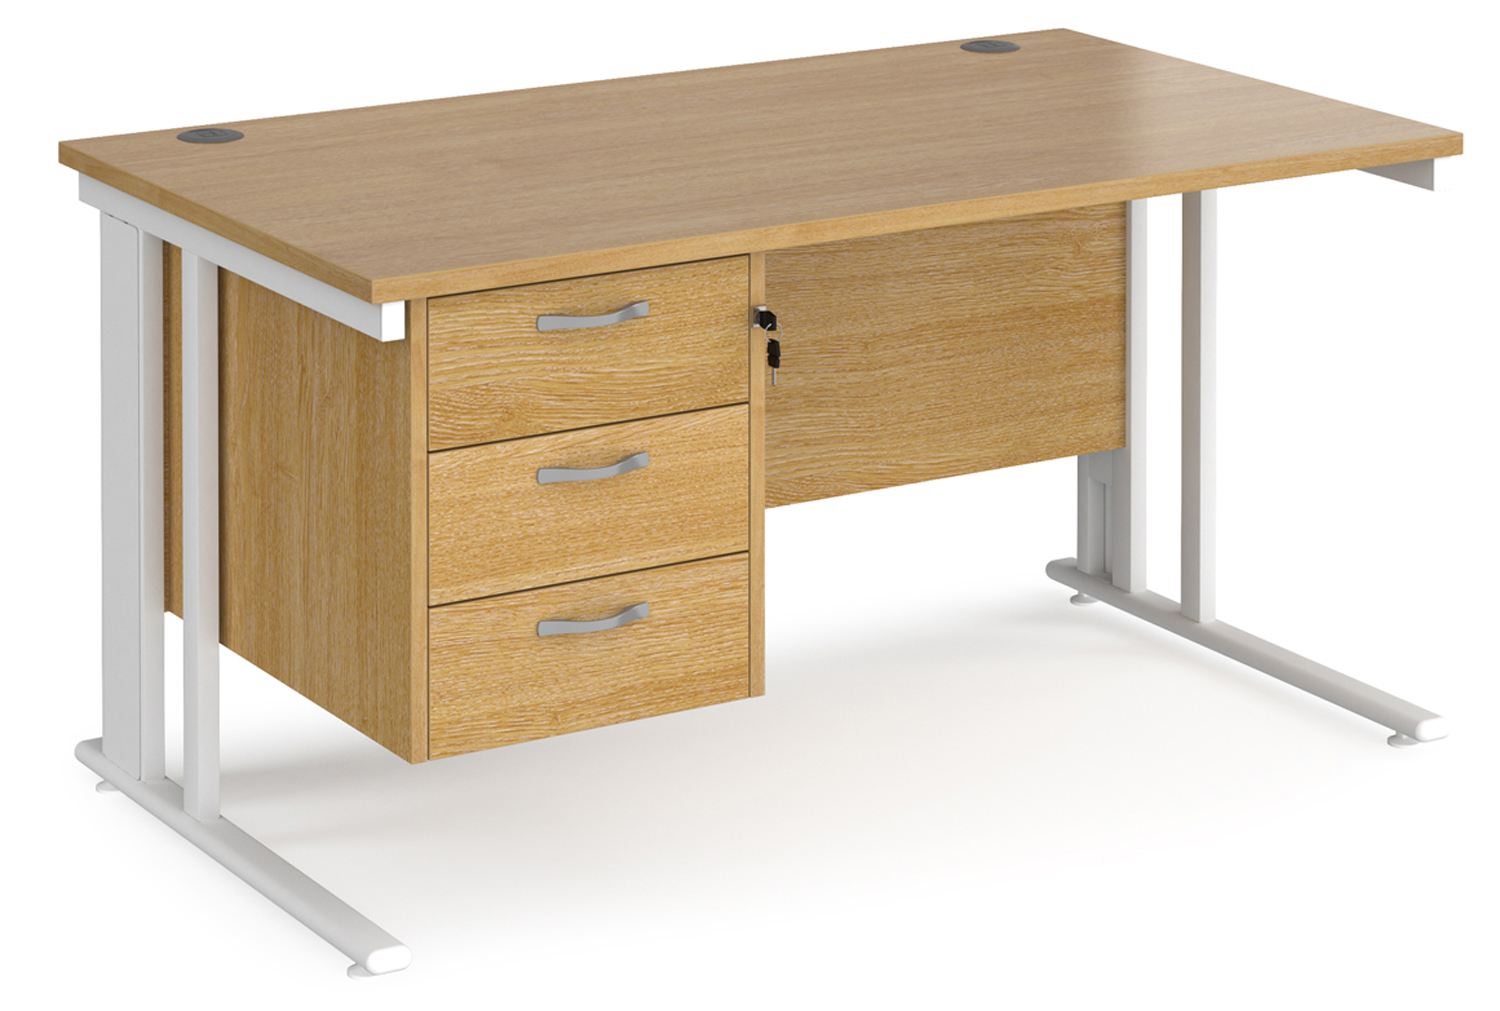 Value Line Deluxe Cable Managed Rectangular Office Desk 3 Drawers (White Legs), 140wx80dx73h (cm), Oak